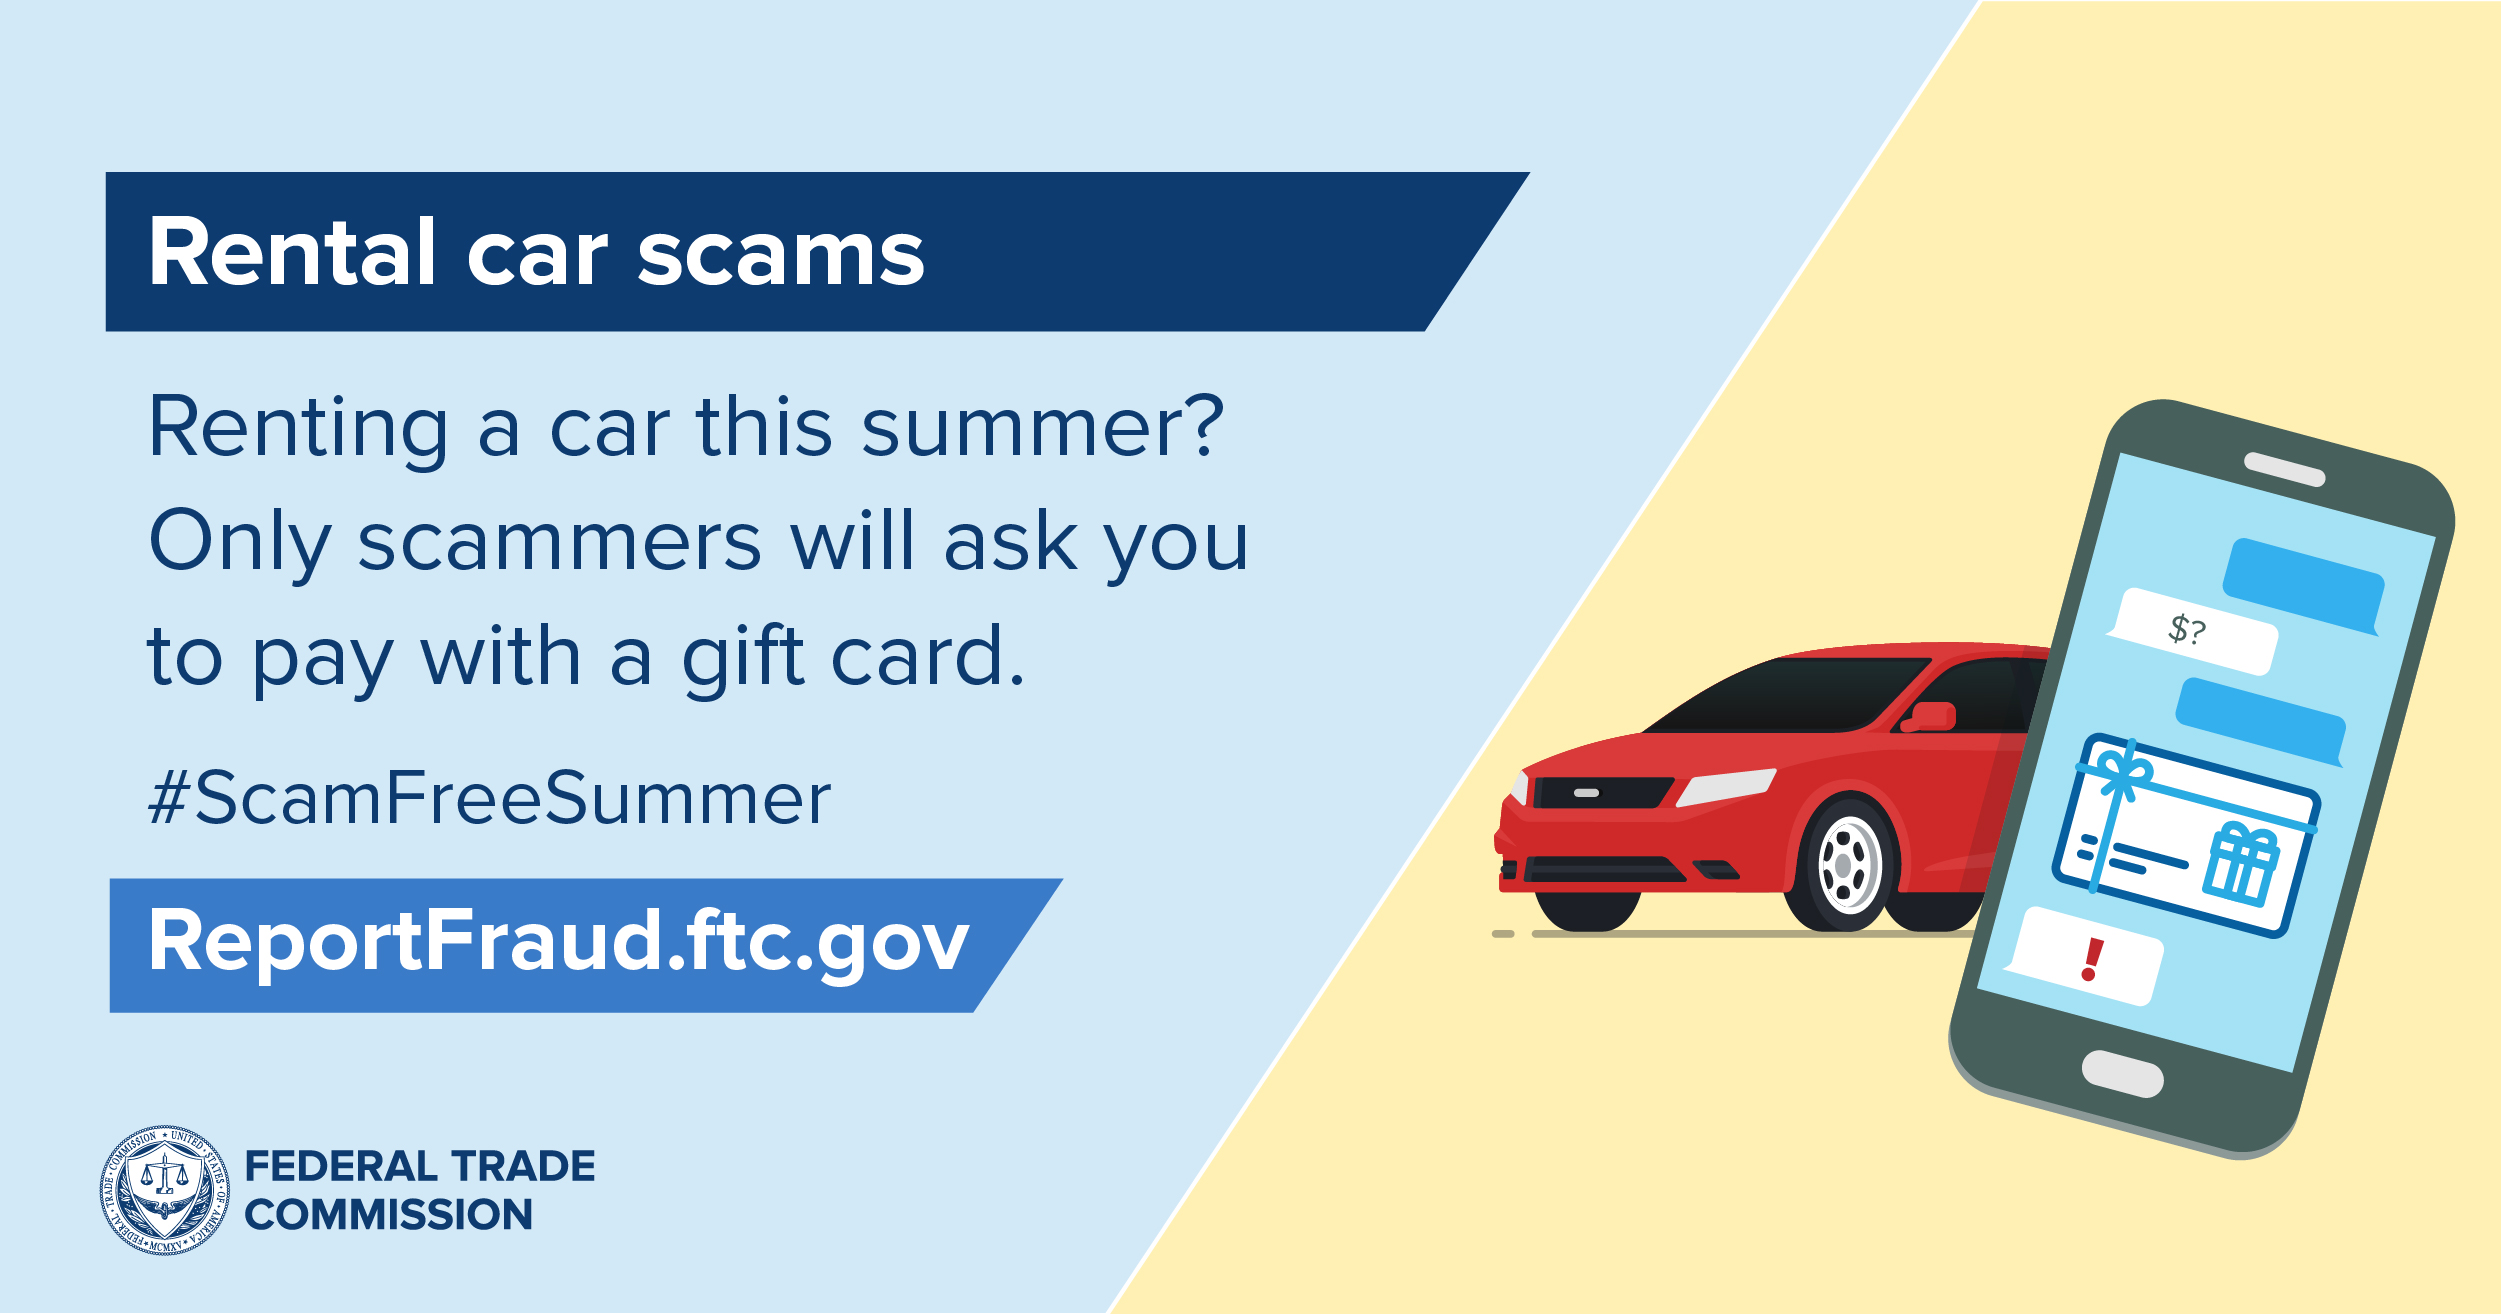 Rental car scams: Renting a car this summer? Only scammers will ask you to pay with a gift card. #Scam Free Summer. ReportFraud.ftc.gov. Image of red car and mobile phone with image of gift card on screen. 